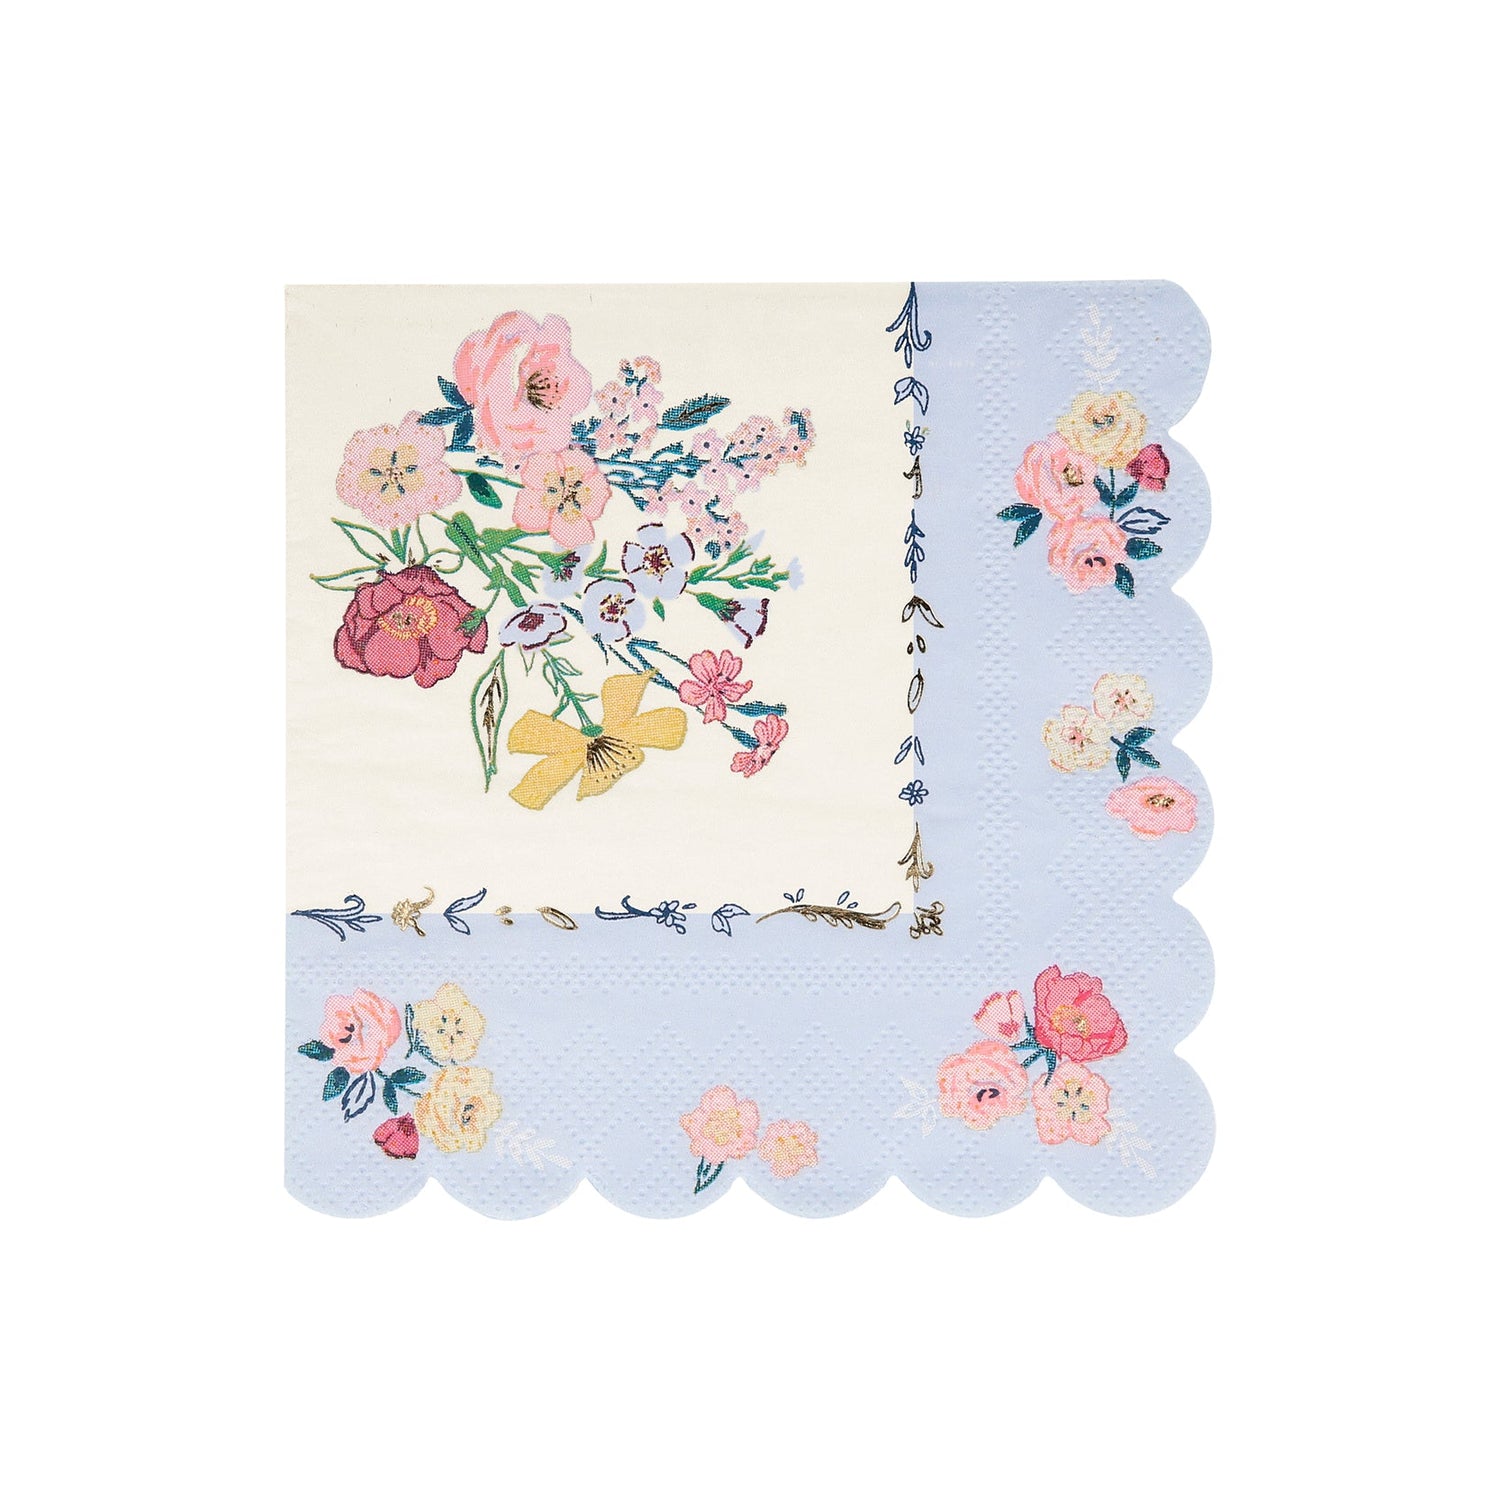 A set of Meri Meri English Garden Napkins with floral designs, perfect for a party table.